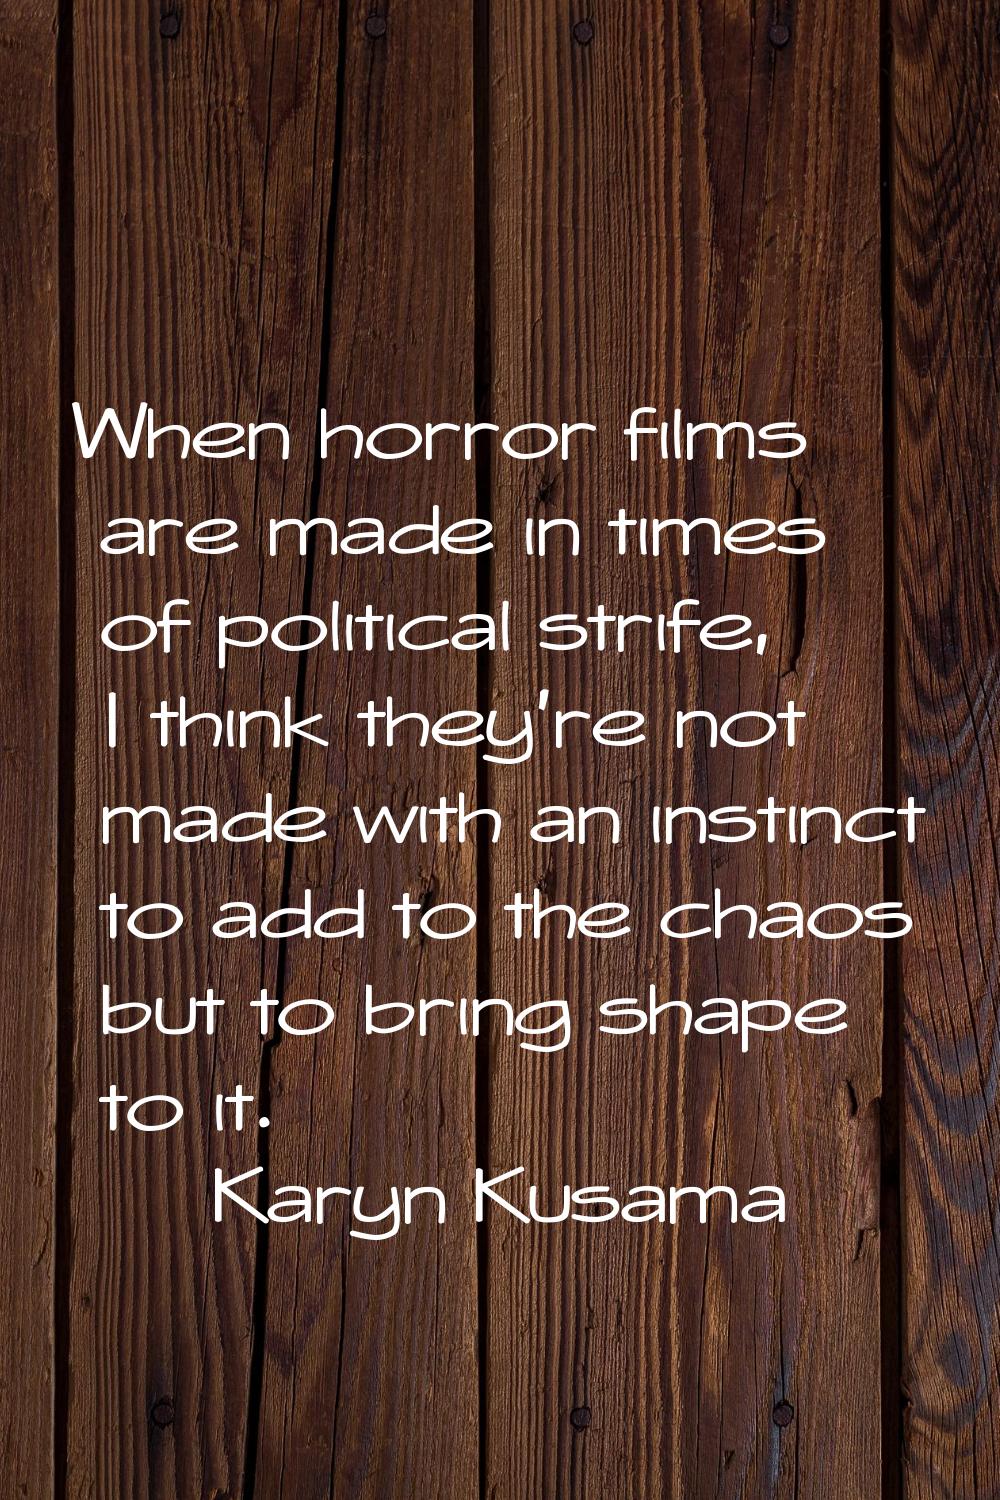 When horror films are made in times of political strife, I think they're not made with an instinct 